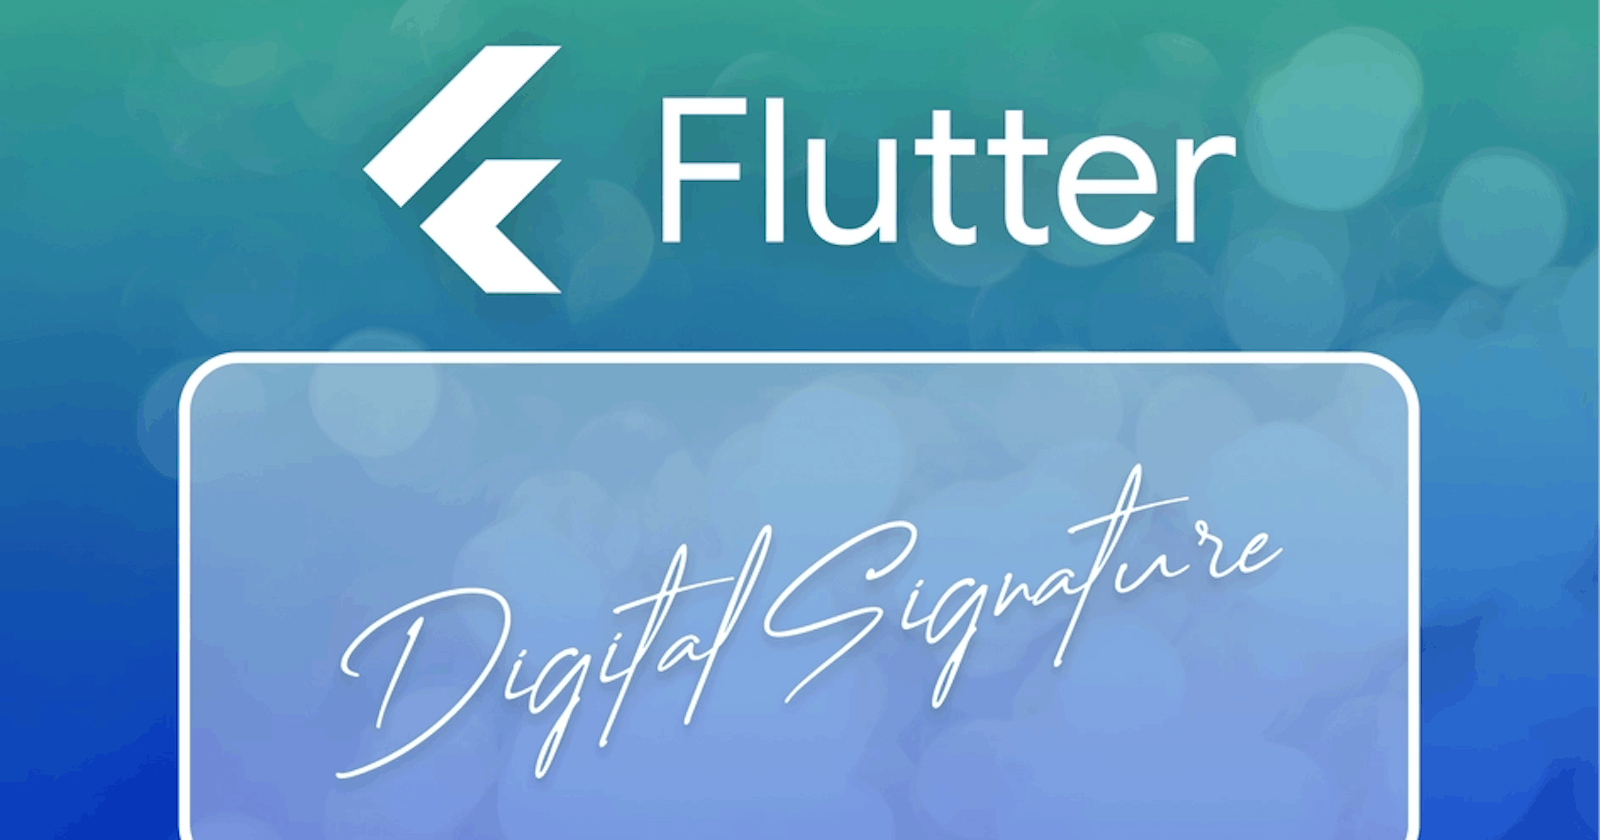 Building a digital Signature pad and Signature Images with Flutter